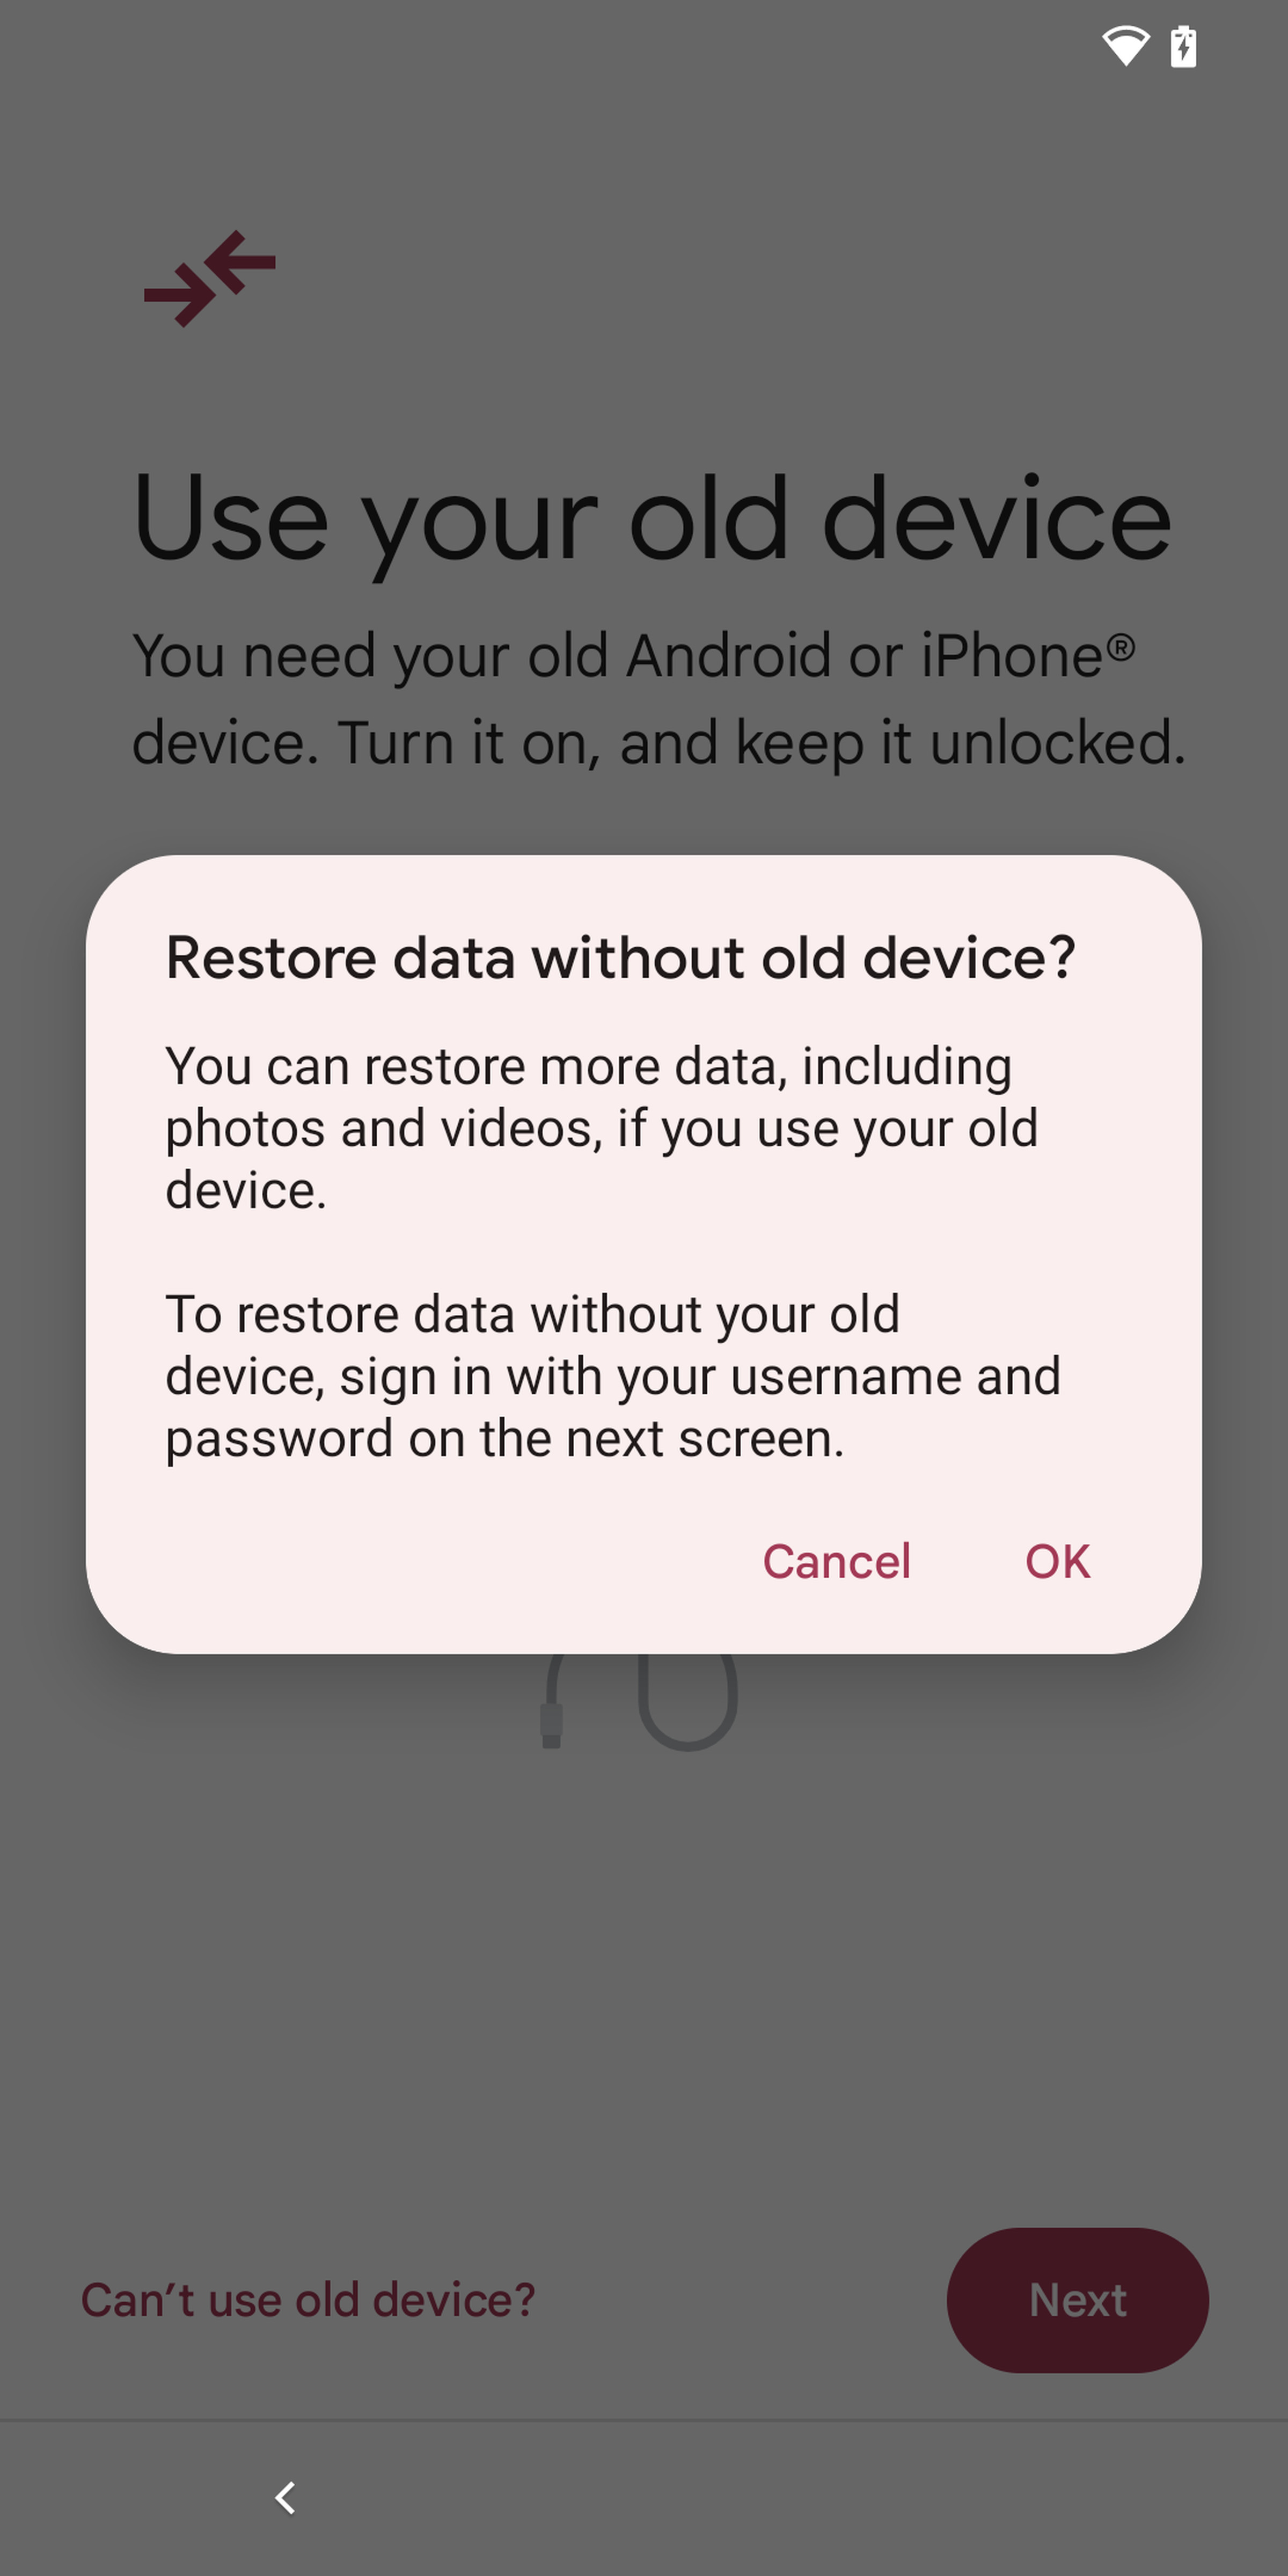 Page: Restore data without old device?